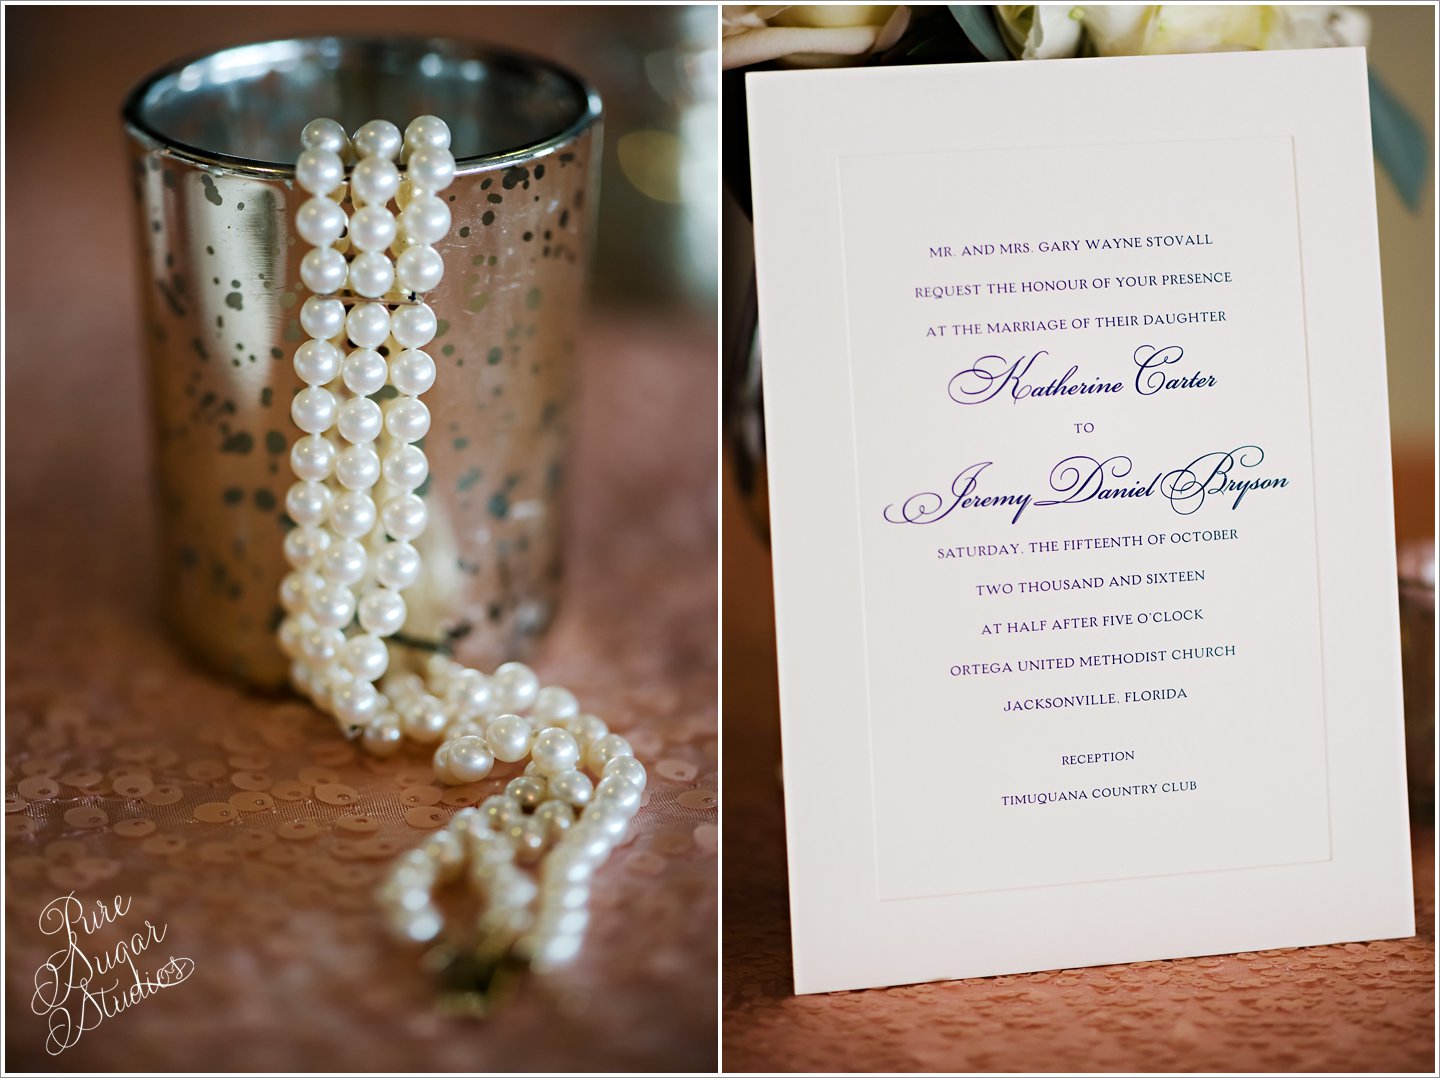 Elegant details at Timuquana Country Club Wedding including a pearl necklace and traditional invitation